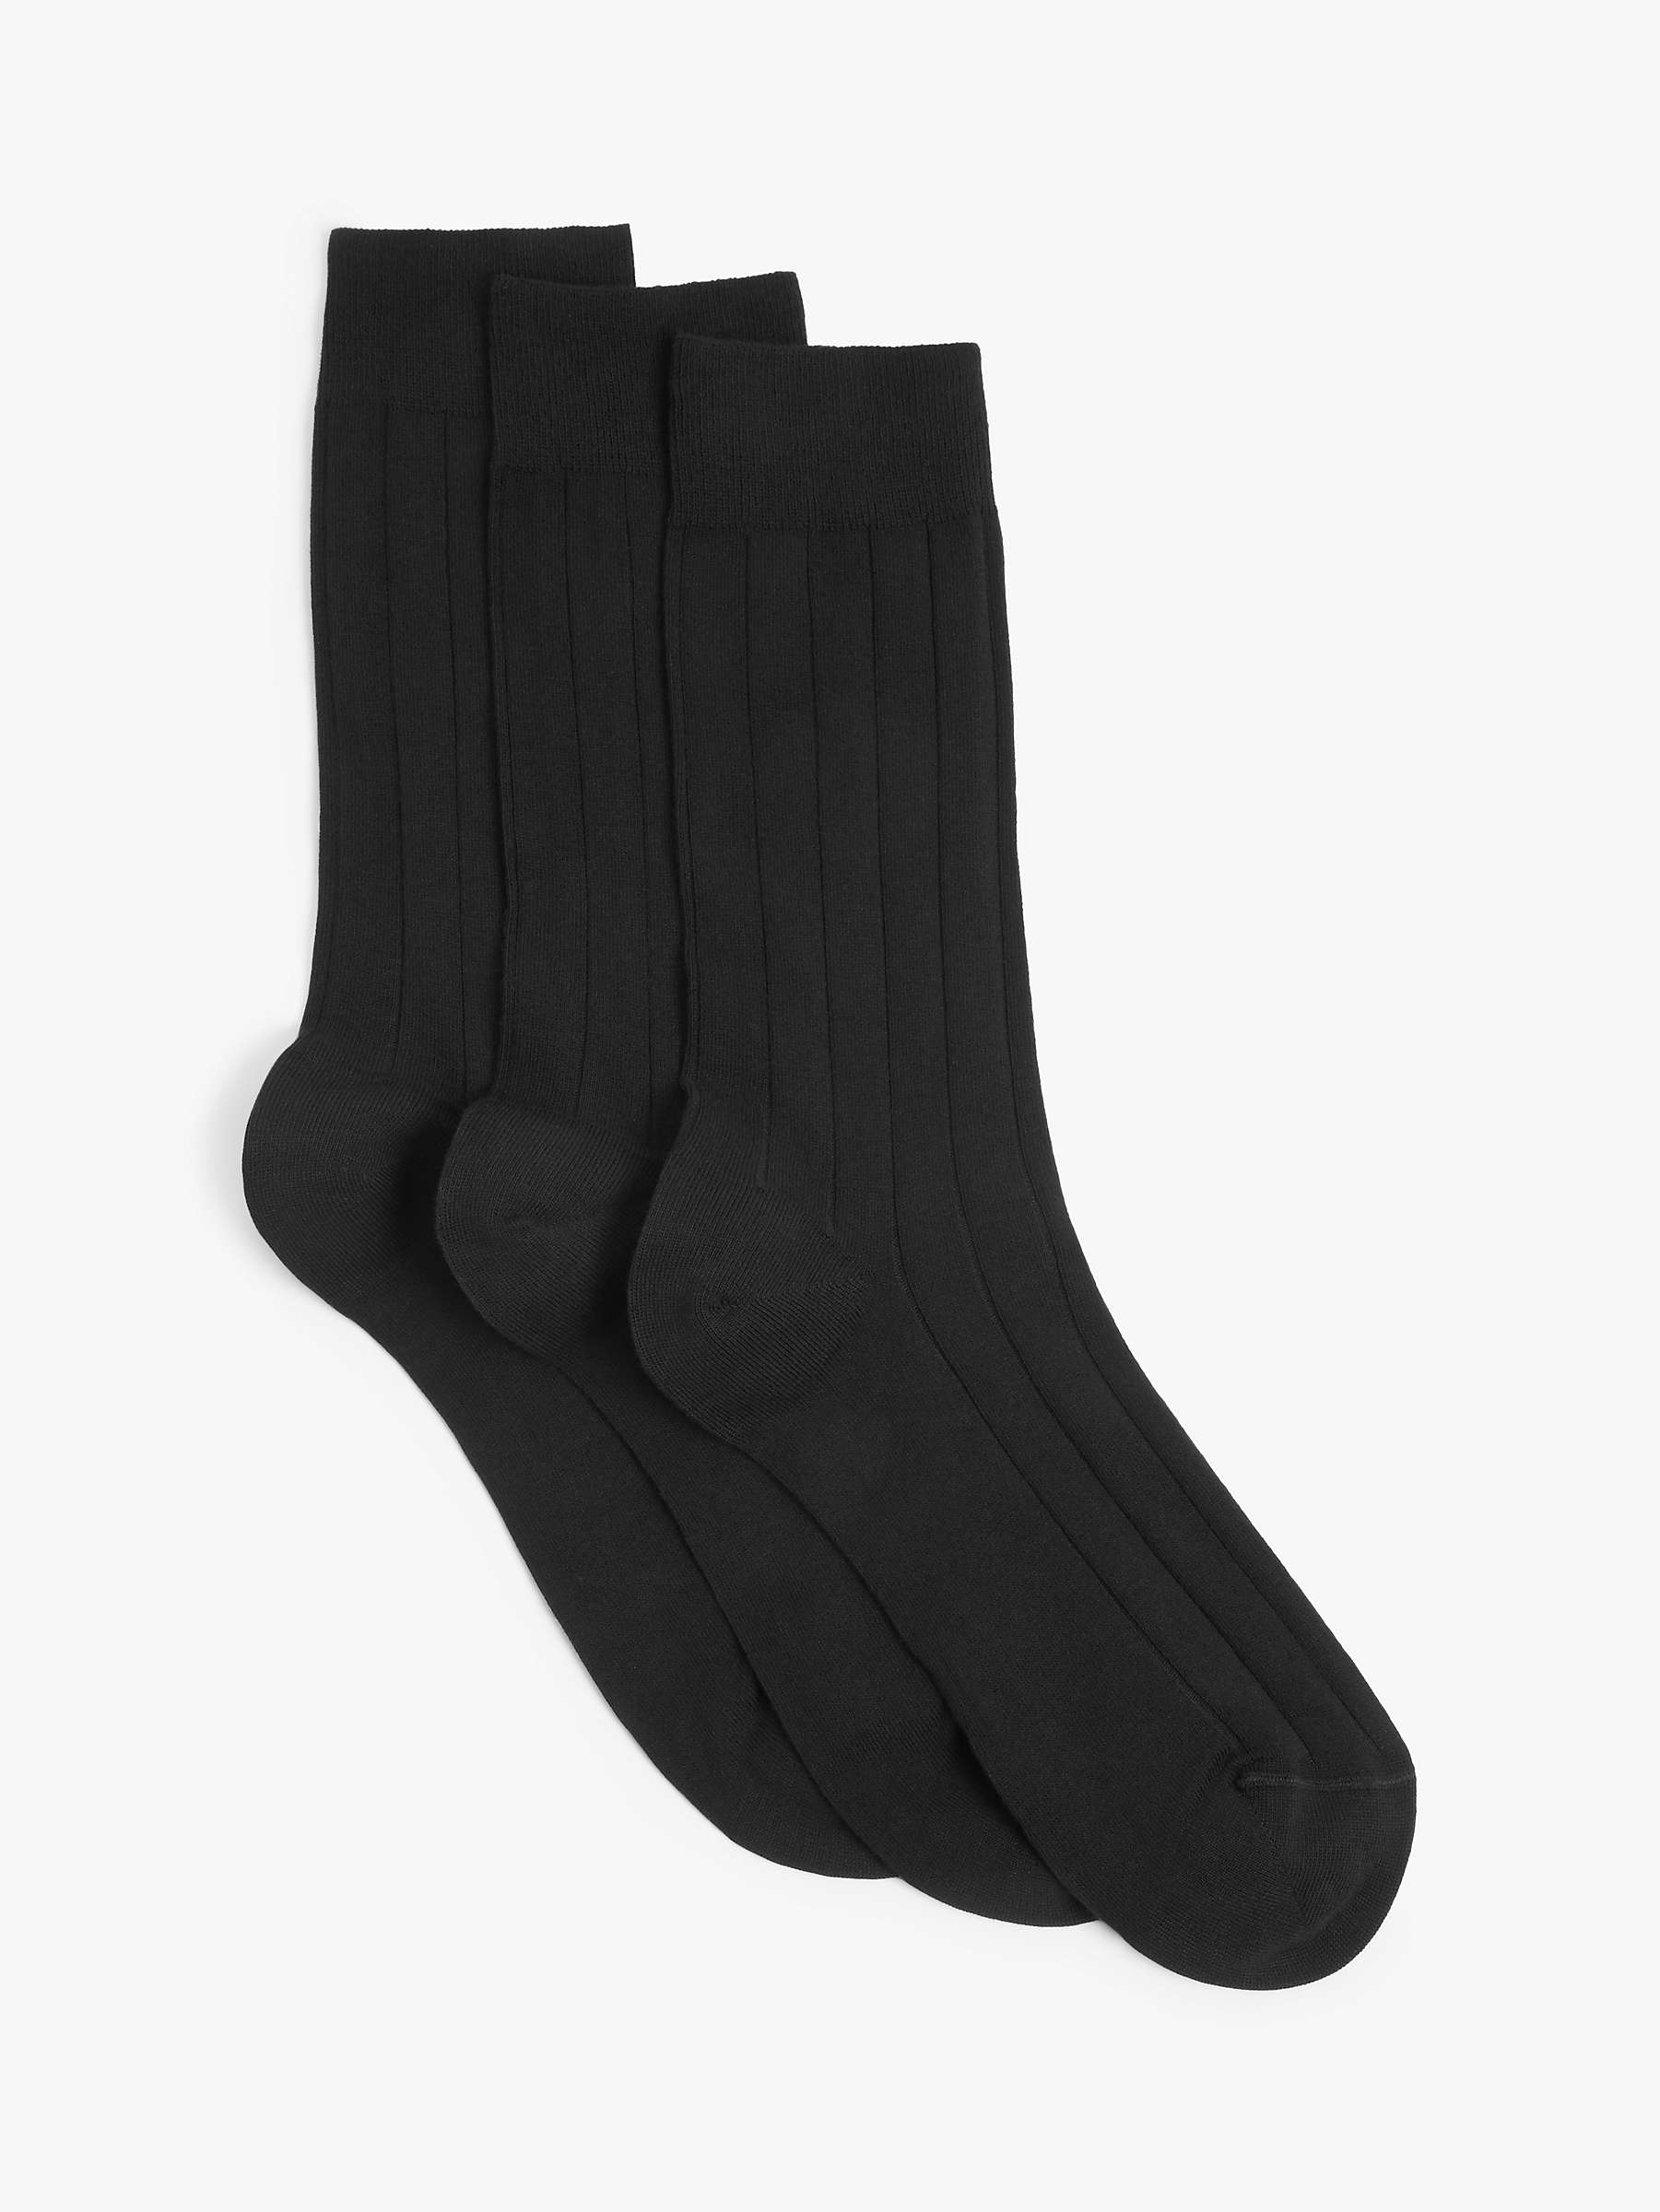 Buy John Lewis Made in Italy Cotton Socks, Pack of 3 Online at johnlewis.com